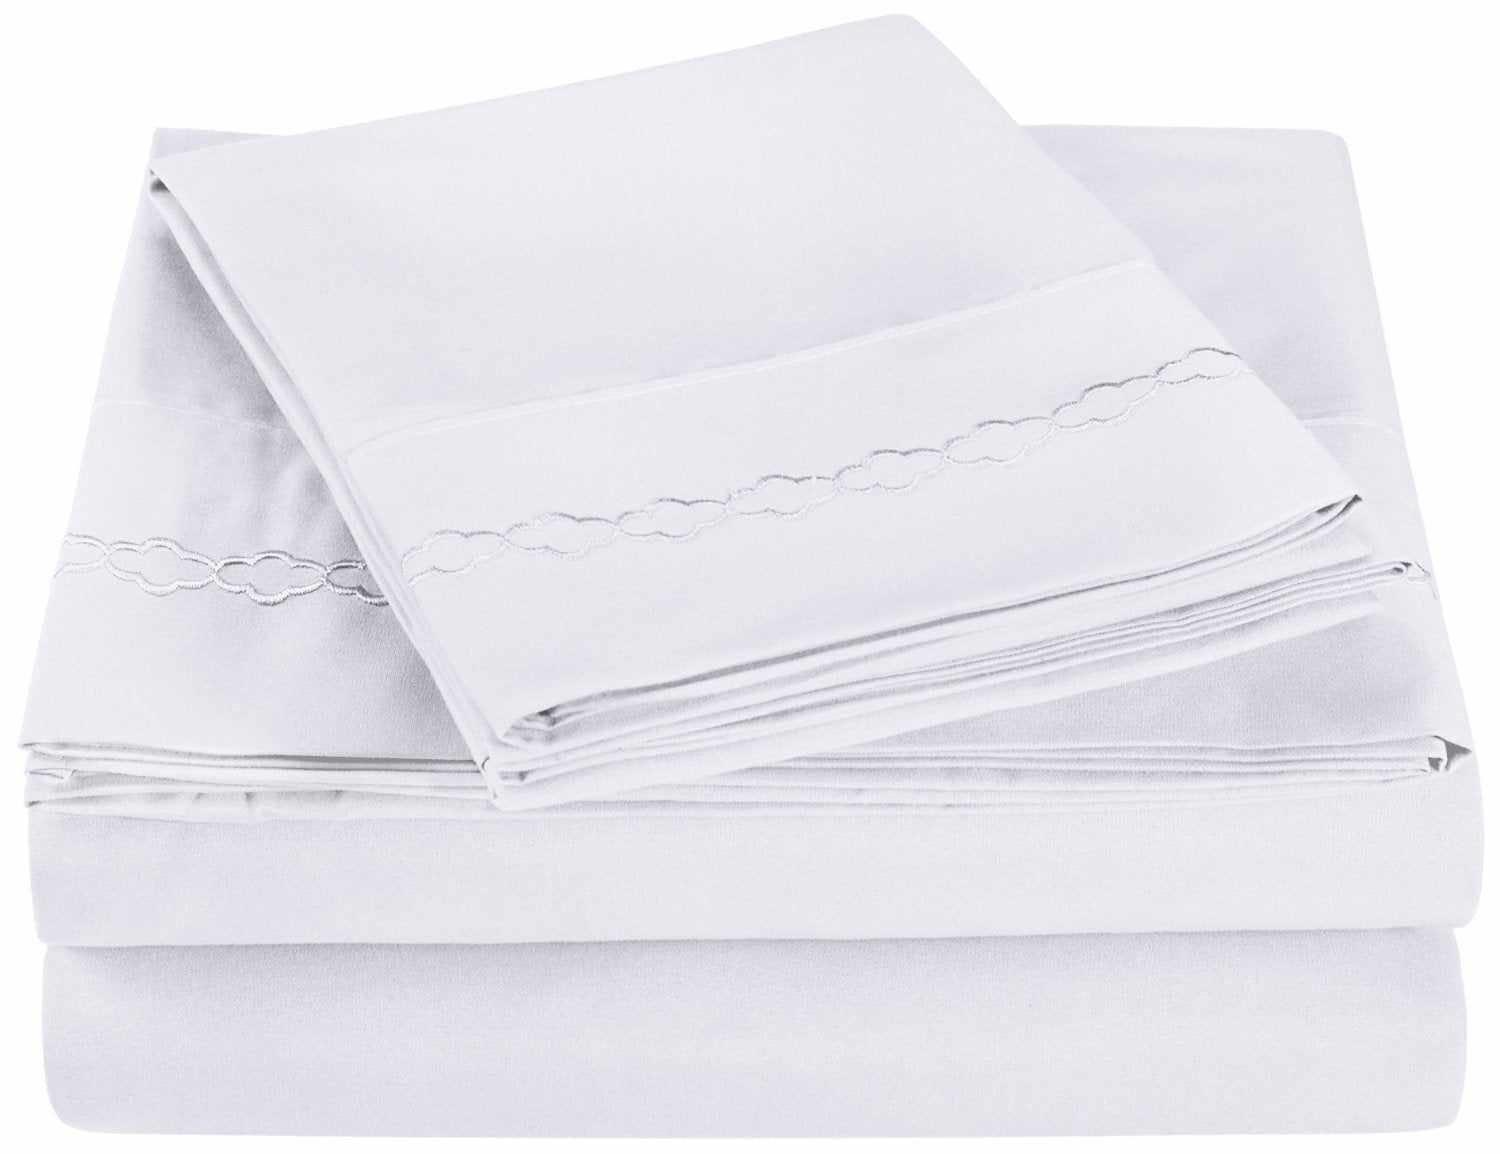  3000 Series Wrinkle Resistant Cloud Embroidered Sheet Set - White